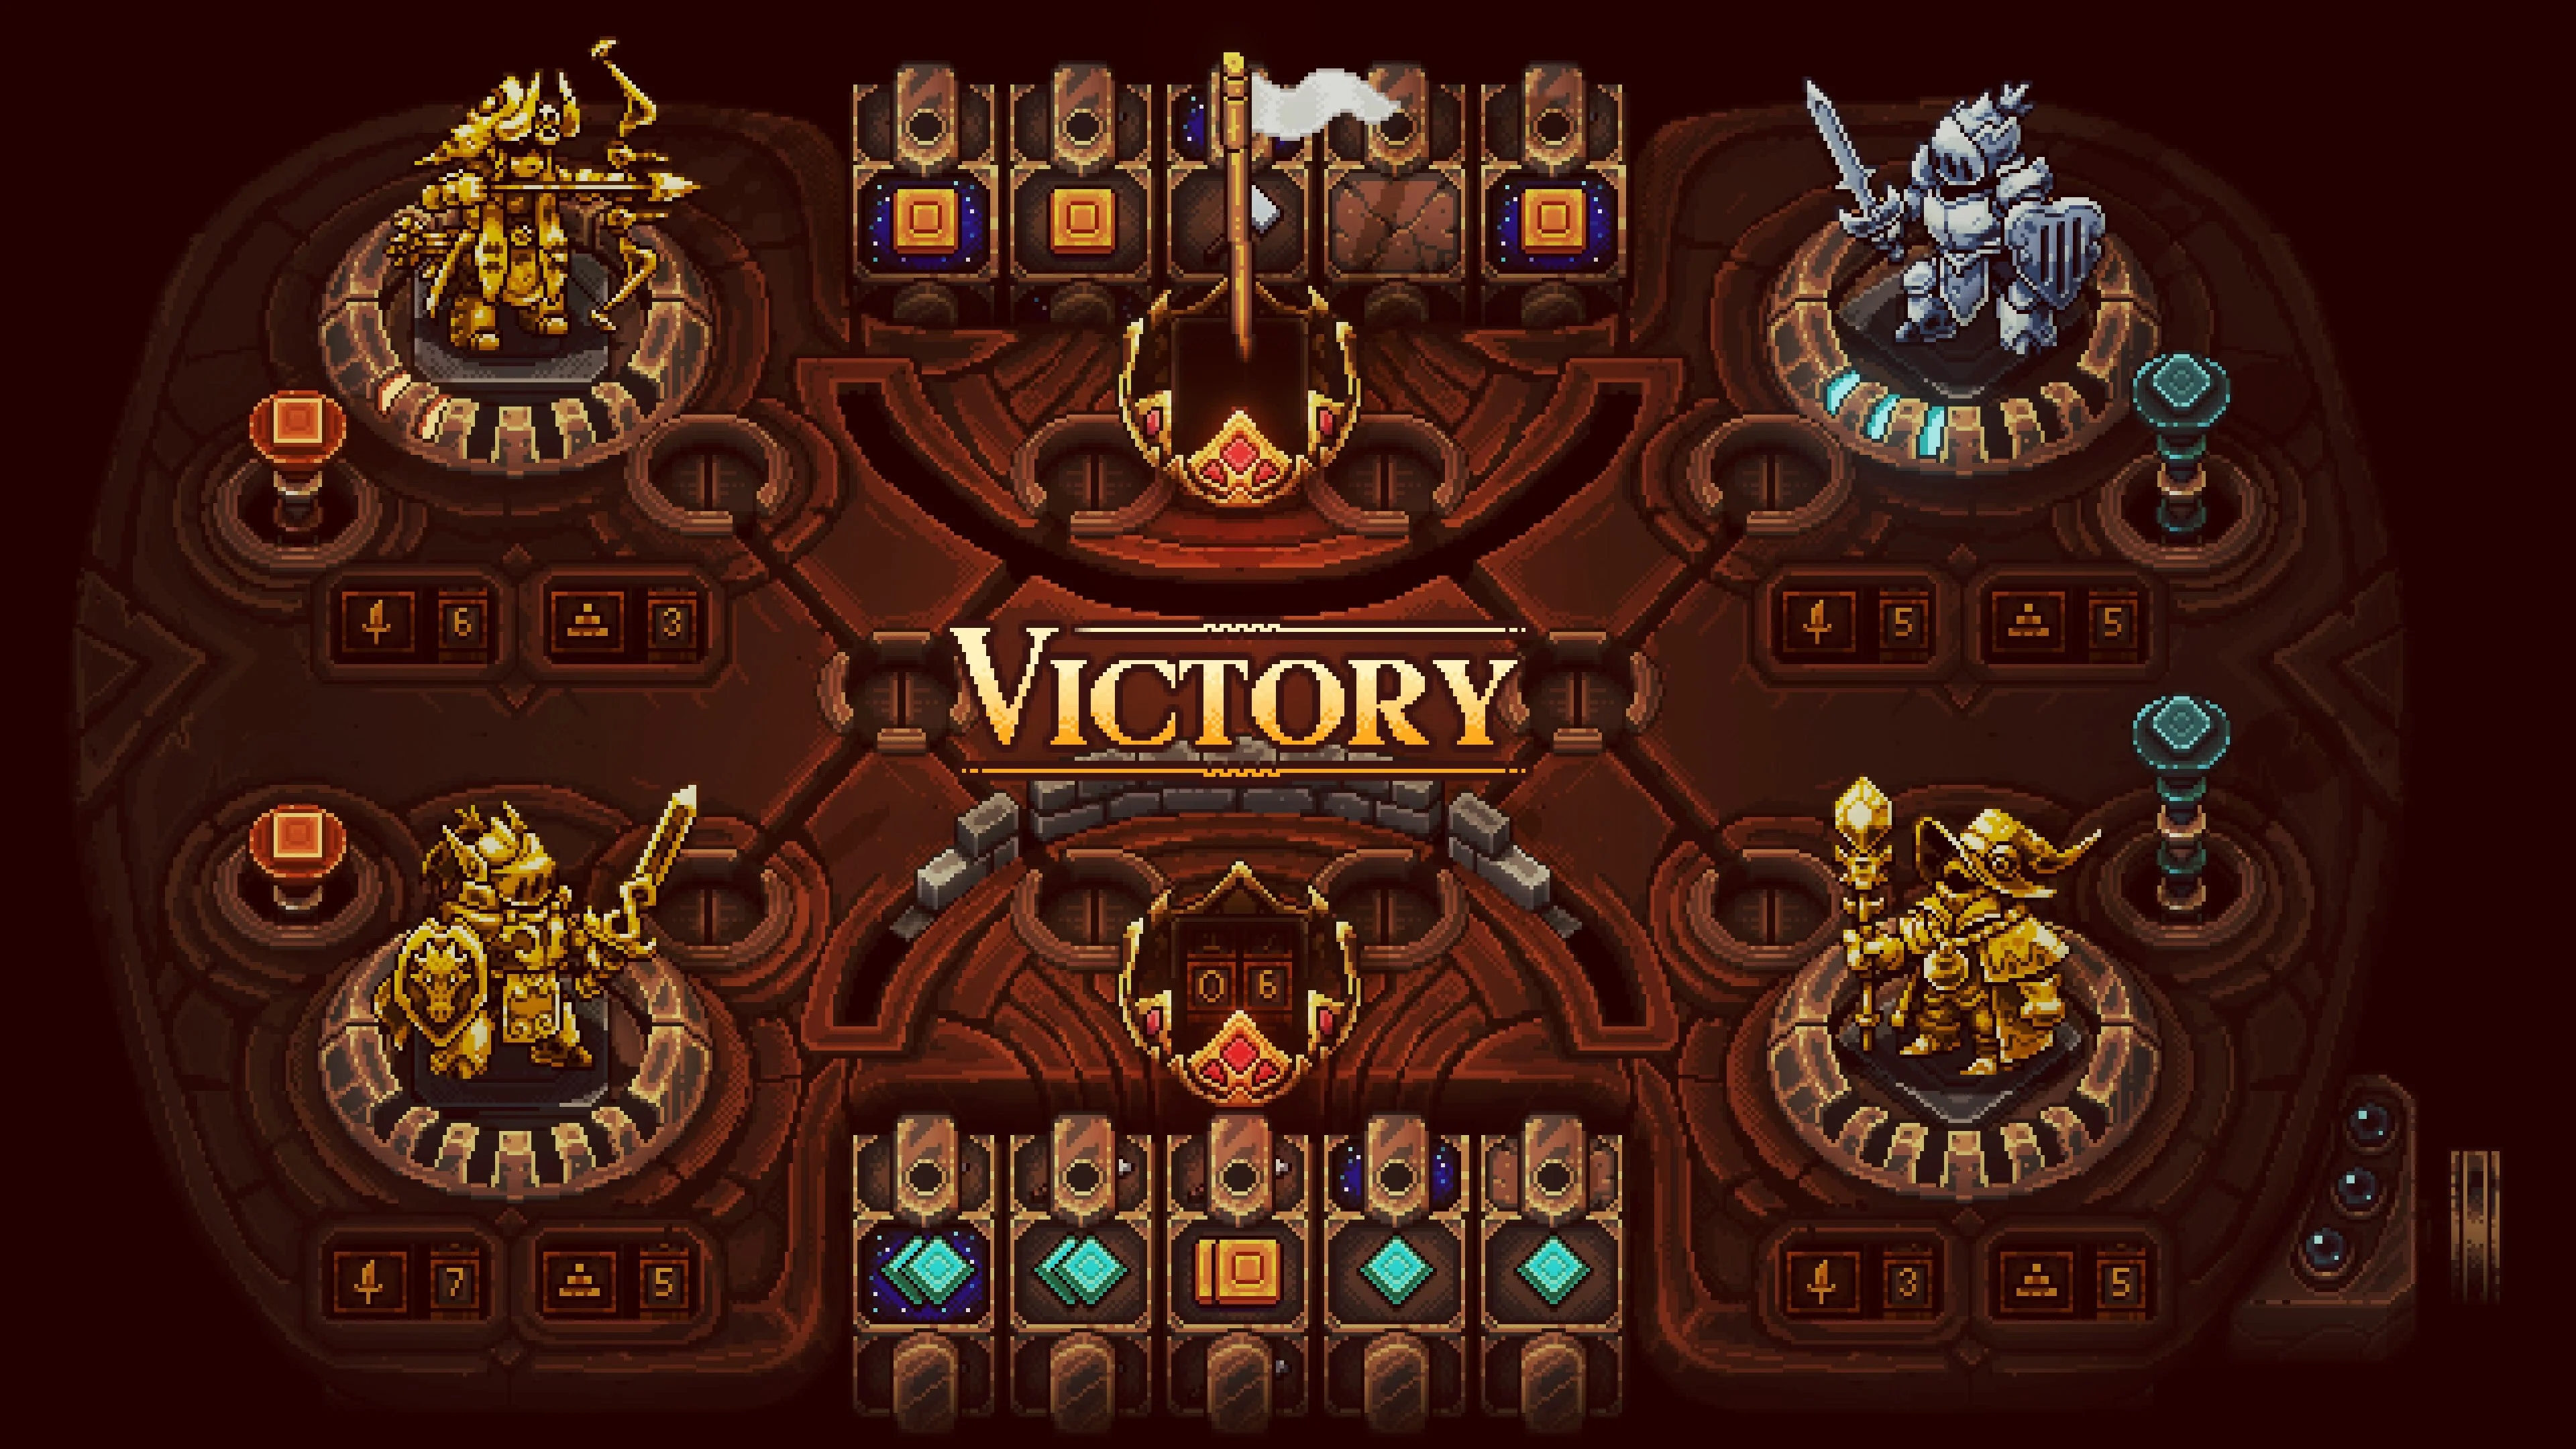 a screenshot of the wheels table in sea of stars. there are four hero figurines on a bronze table with slots and trapdoors. there is a white flag flying above the opponent's crown, and it says 'victory' in the middle of the screen